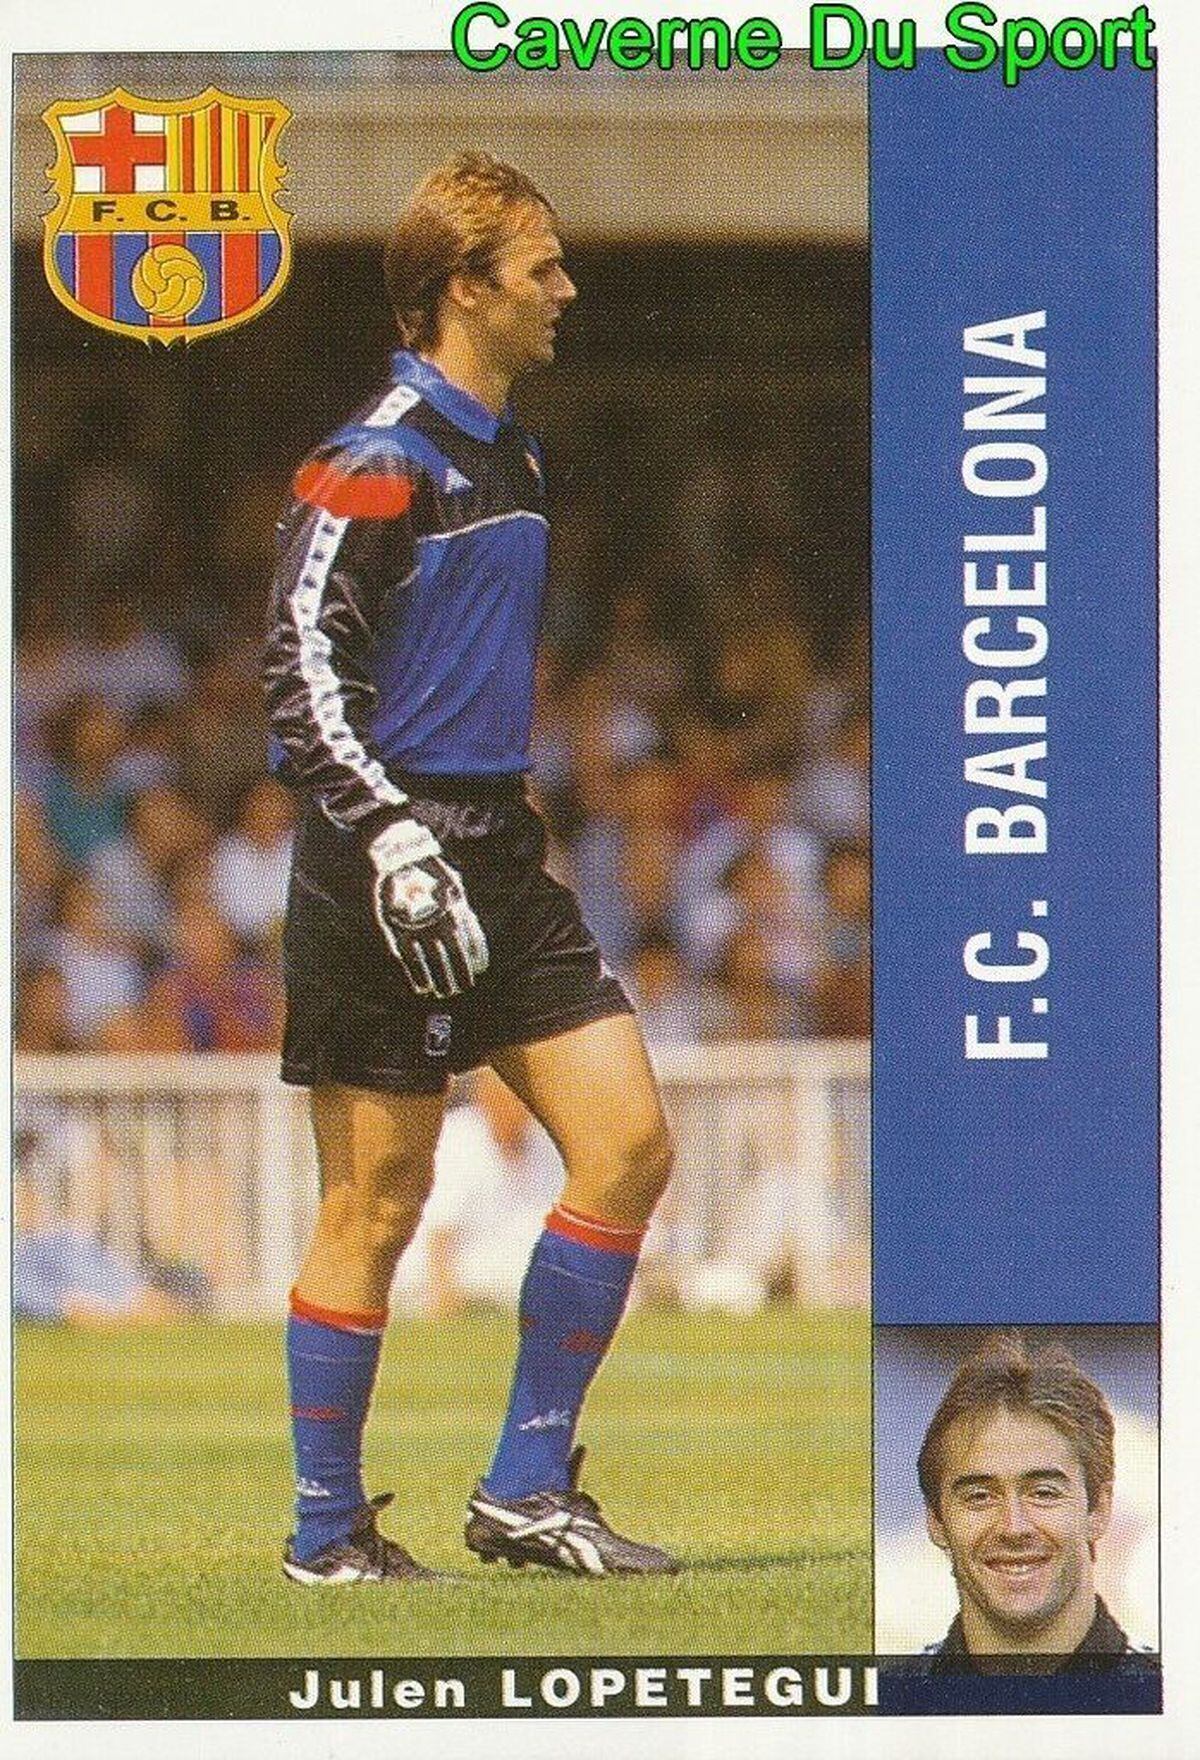 Collector’s item: A football card of Julen Lopetegui in his days as Barcelona goalkeeper